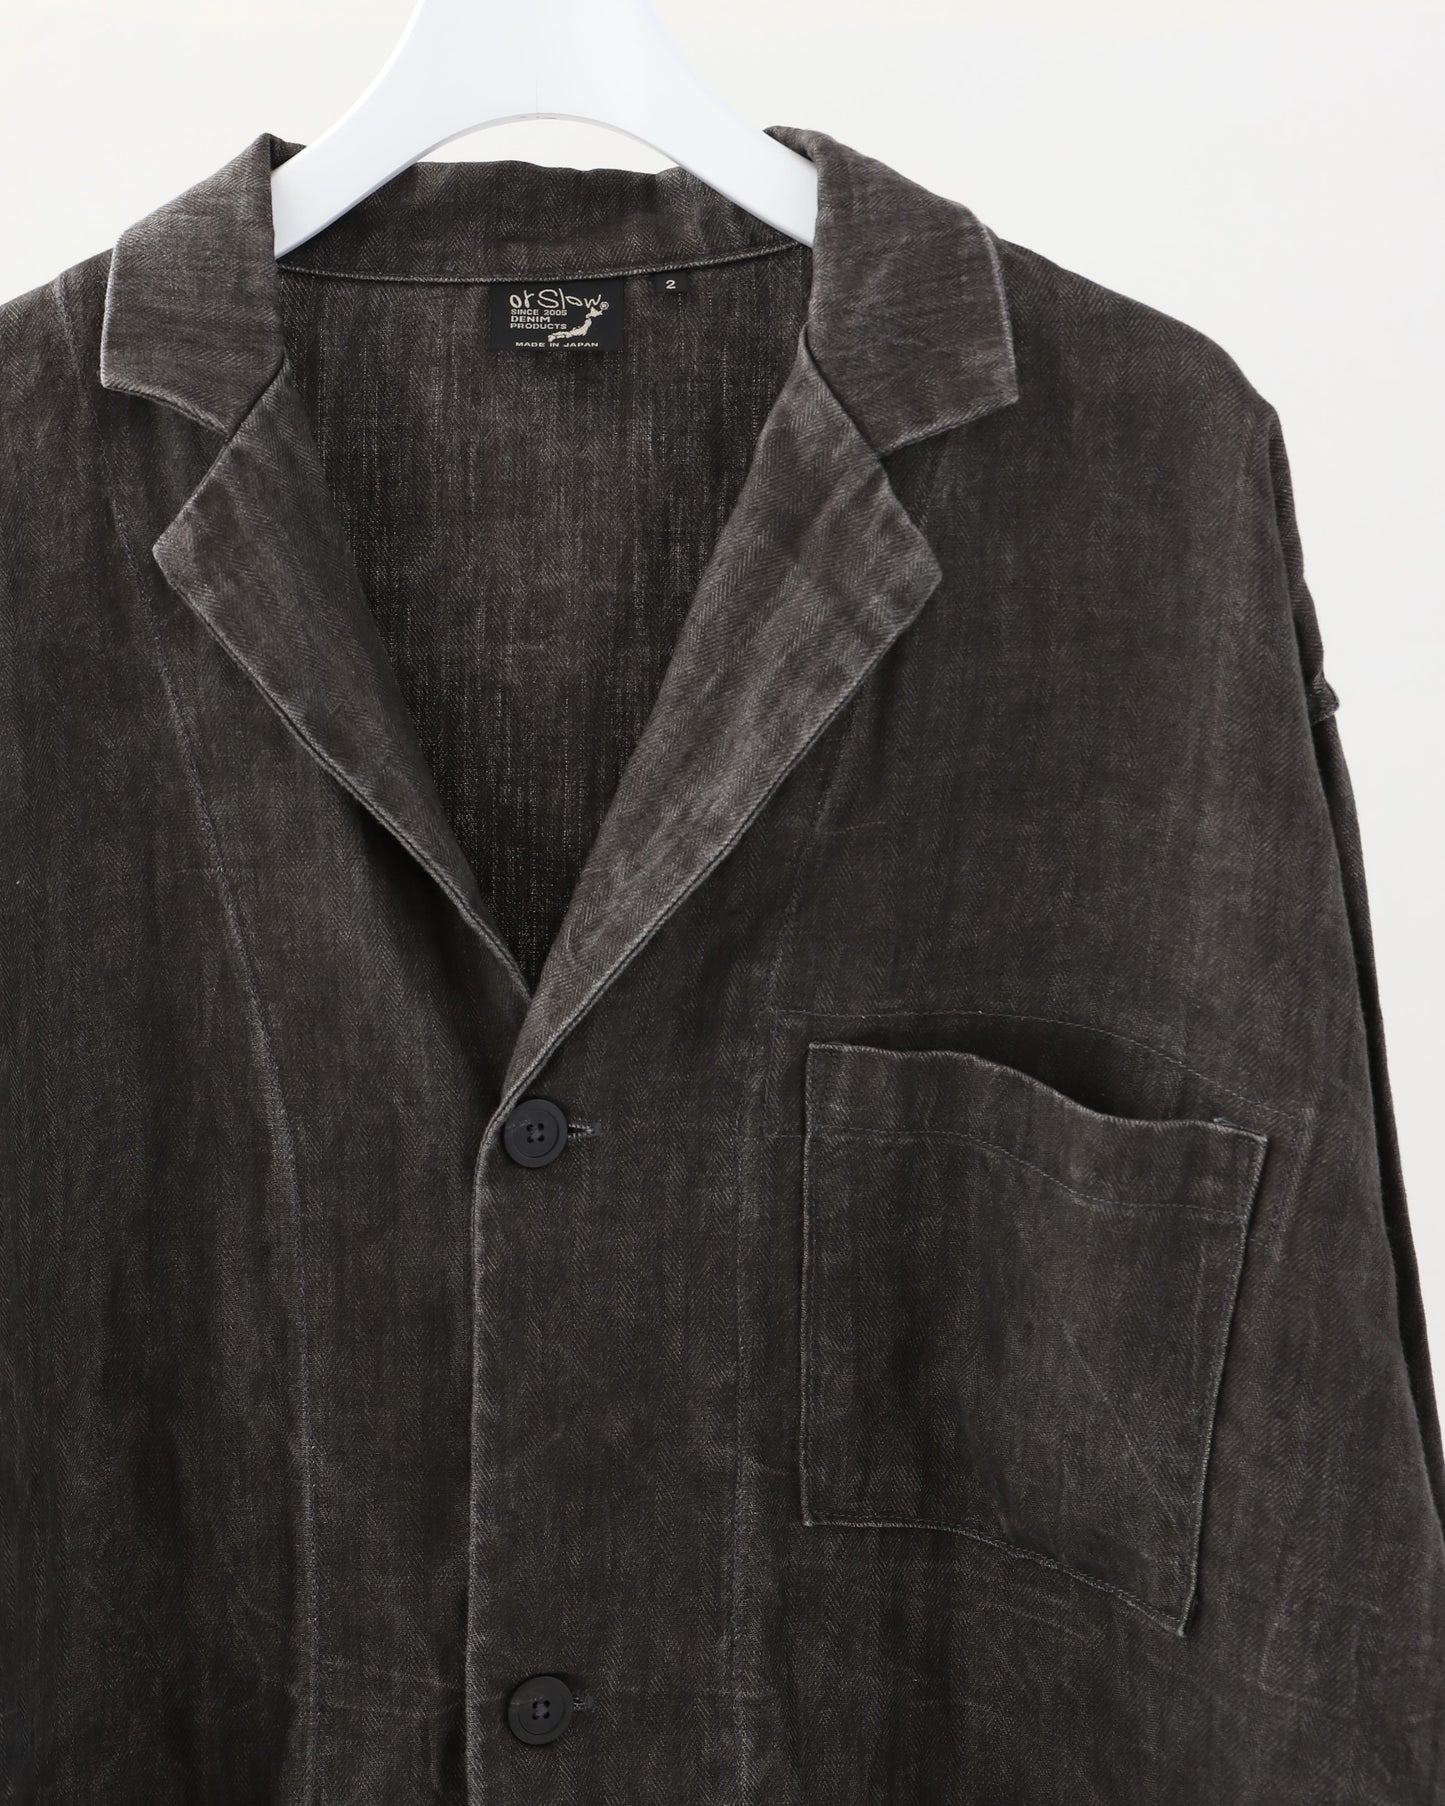 SUMI DYED SIMPLE WORK JACKET CHARCOAL GRAY